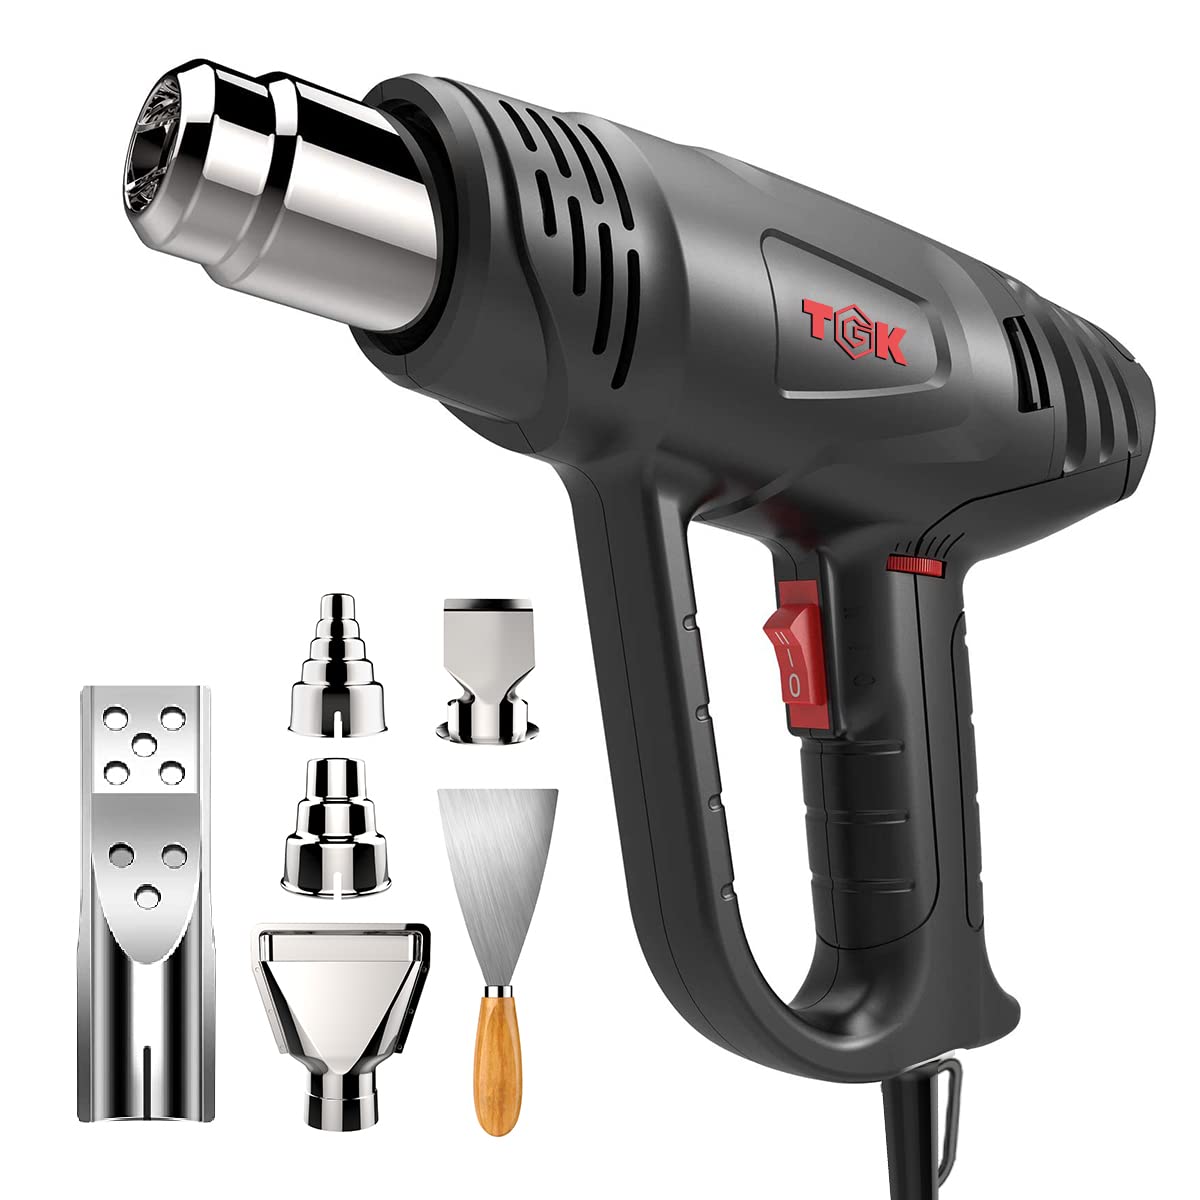 Cheapest Price Variable Temperature Heat Gun - Heat Gun, TGK 1800W Heavy Duty Hot Air Gun Kit 122℉~1202℉ Dual Temperature Settings with 6 Nozzle Attachments Overload Protection for Crafts, Shrink ...